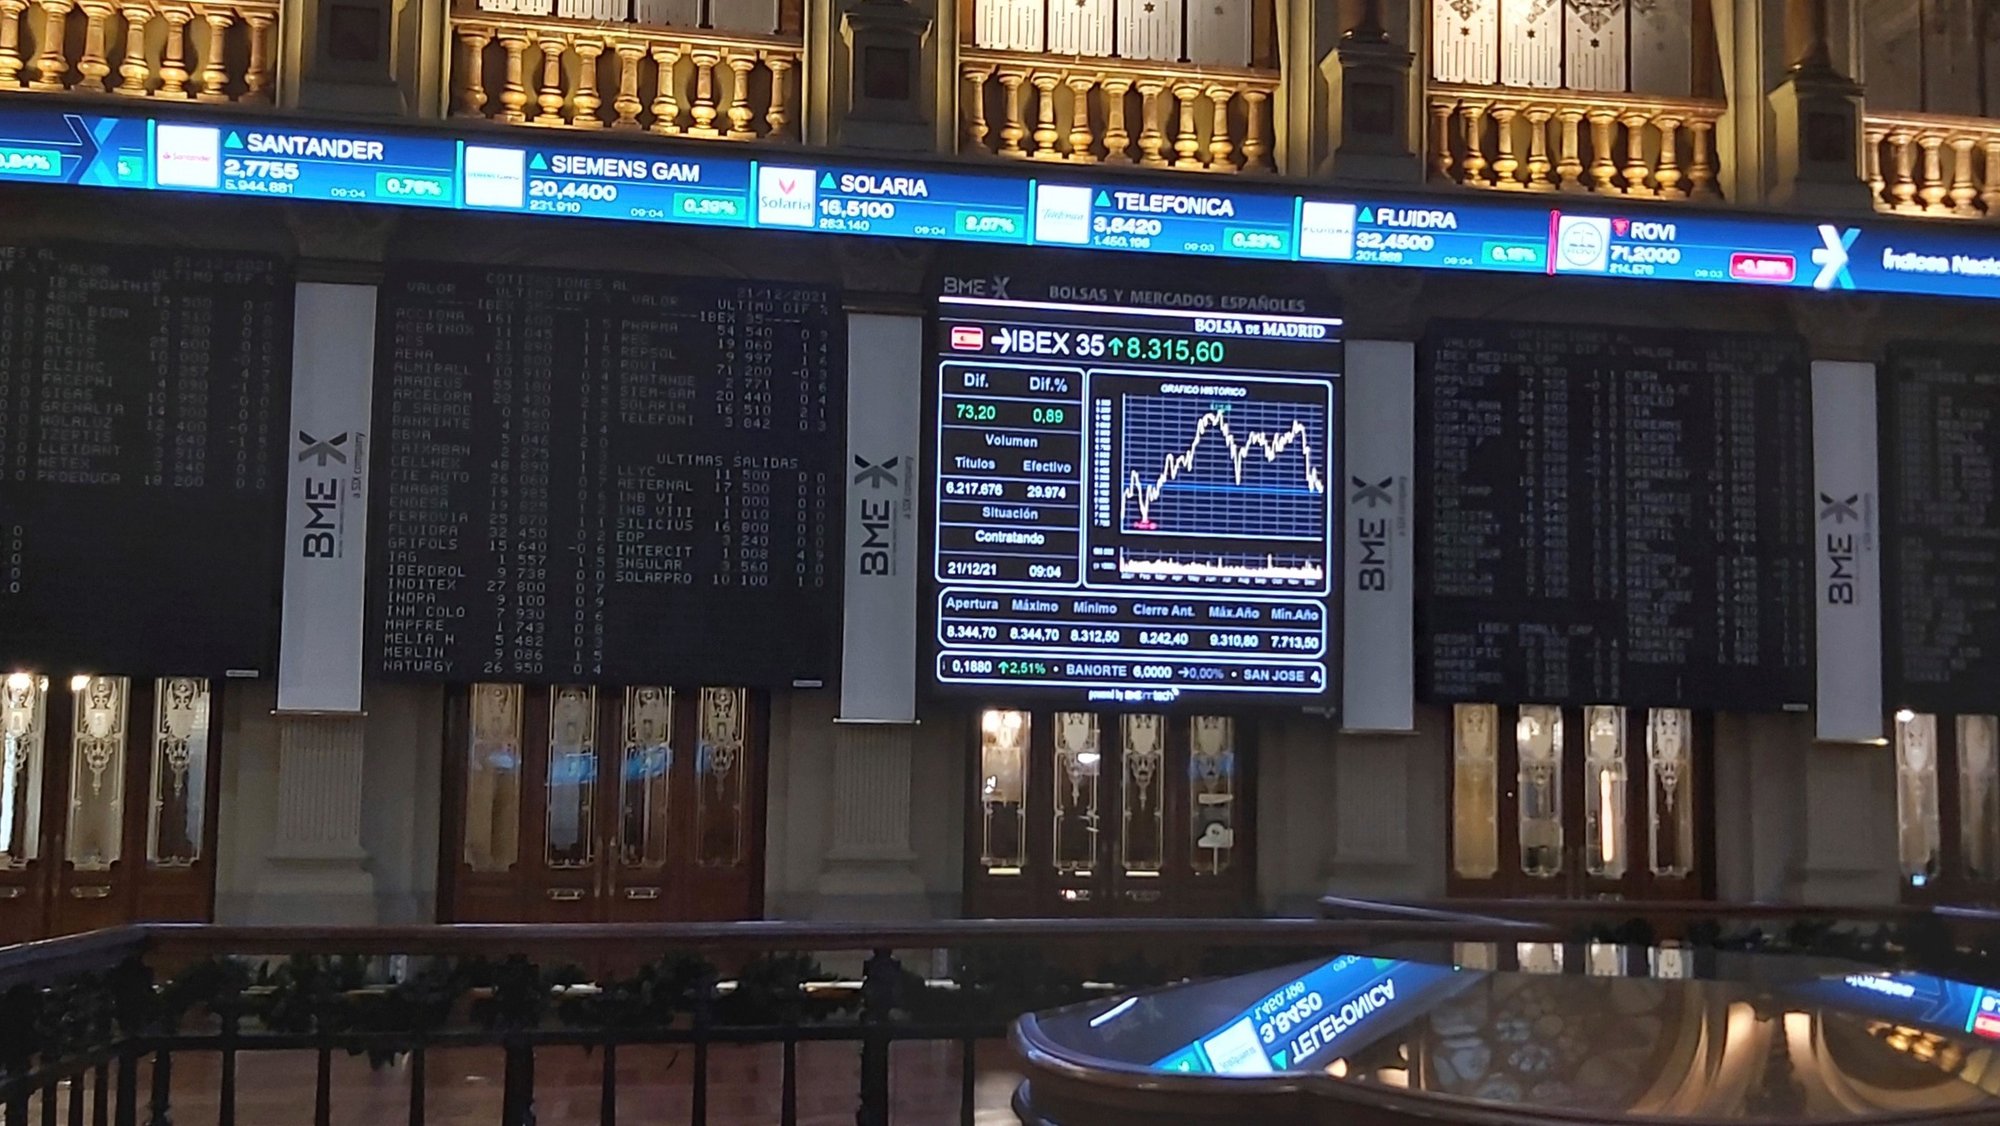 epa09652207 General view of the Spanish Stock Exchange of Madrid, Spain, 21 December 2021. The Spanish Stock Market rose 1.20 percent until the 8,300 points after opening.  EPA/ALTEA TEJIDO